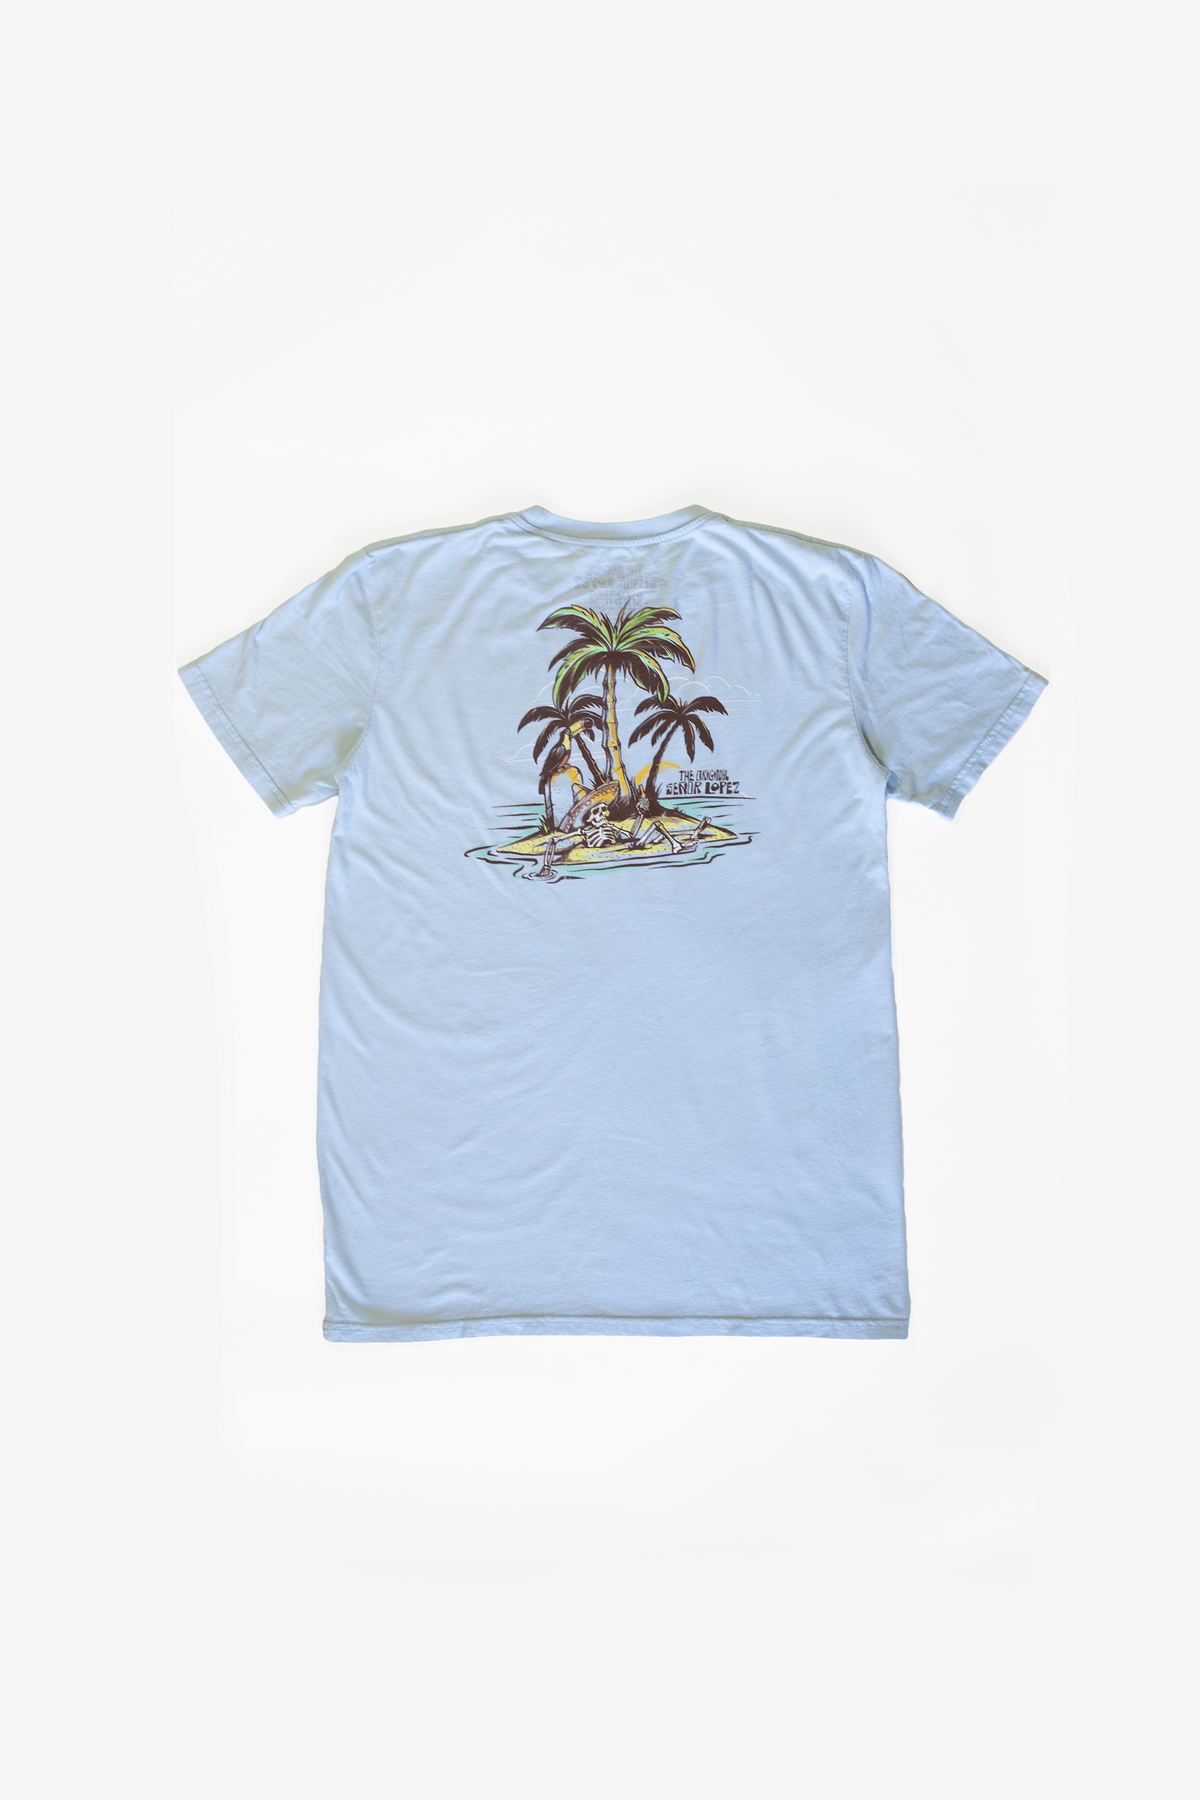 T-Shirt - Chillin In Paradise